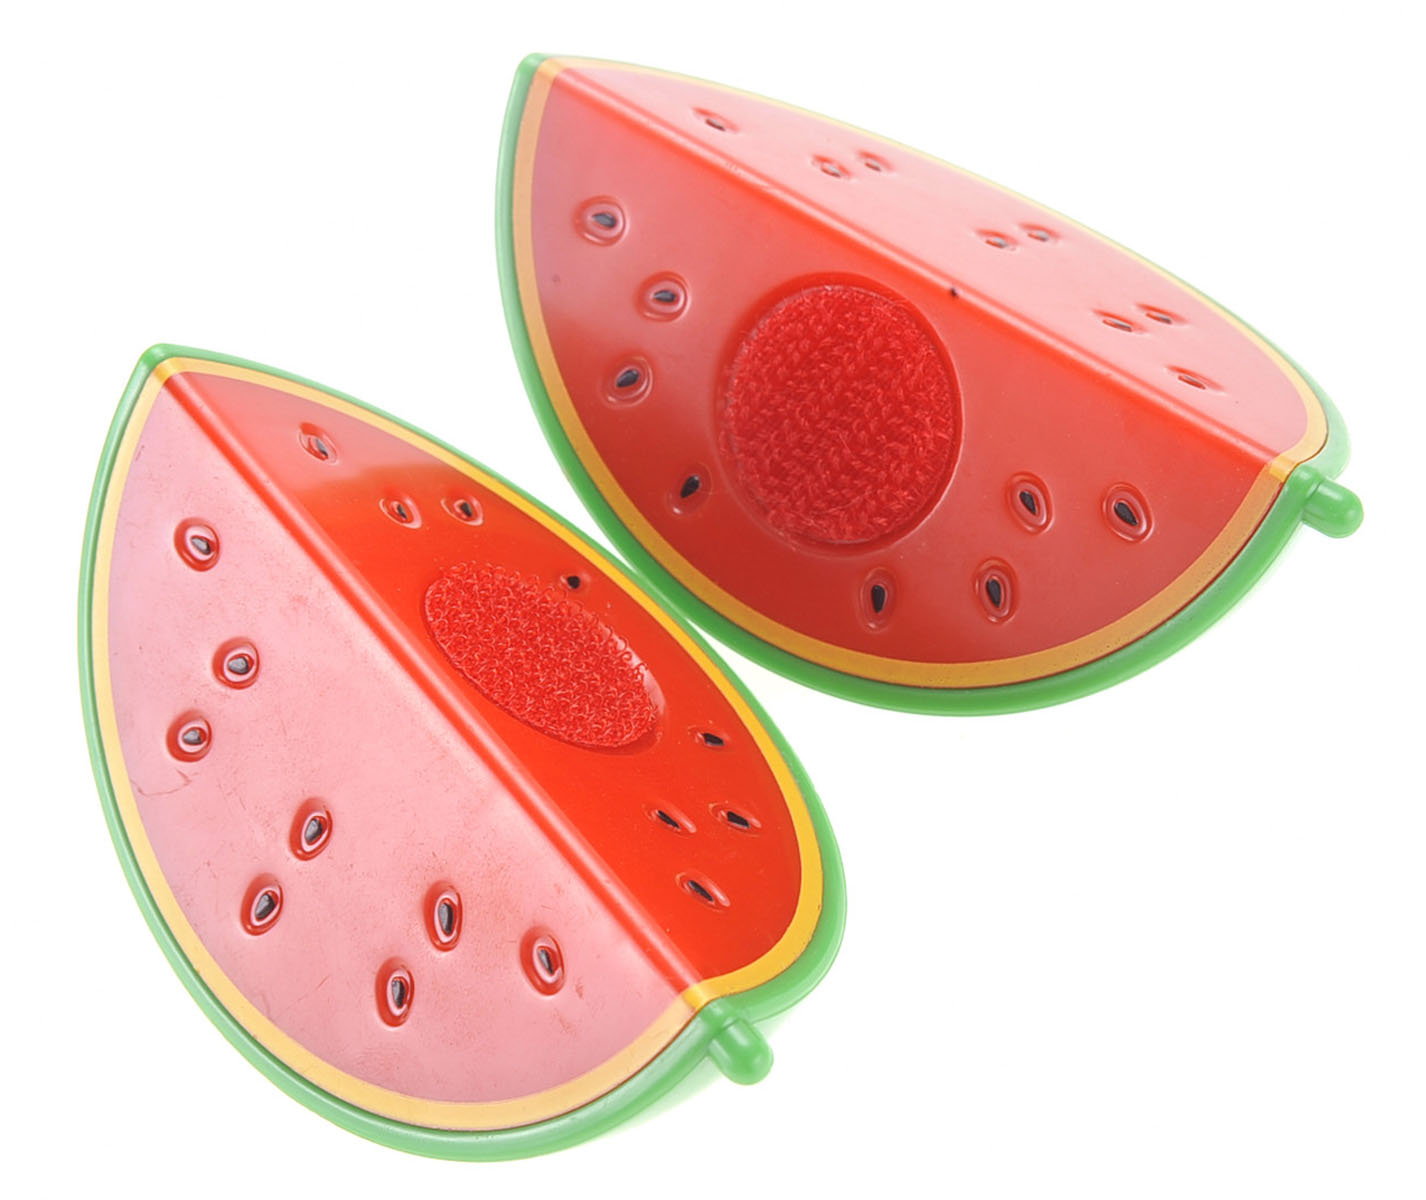 Pizza Playset with Watermelon, Icecream and Utensils - Kids